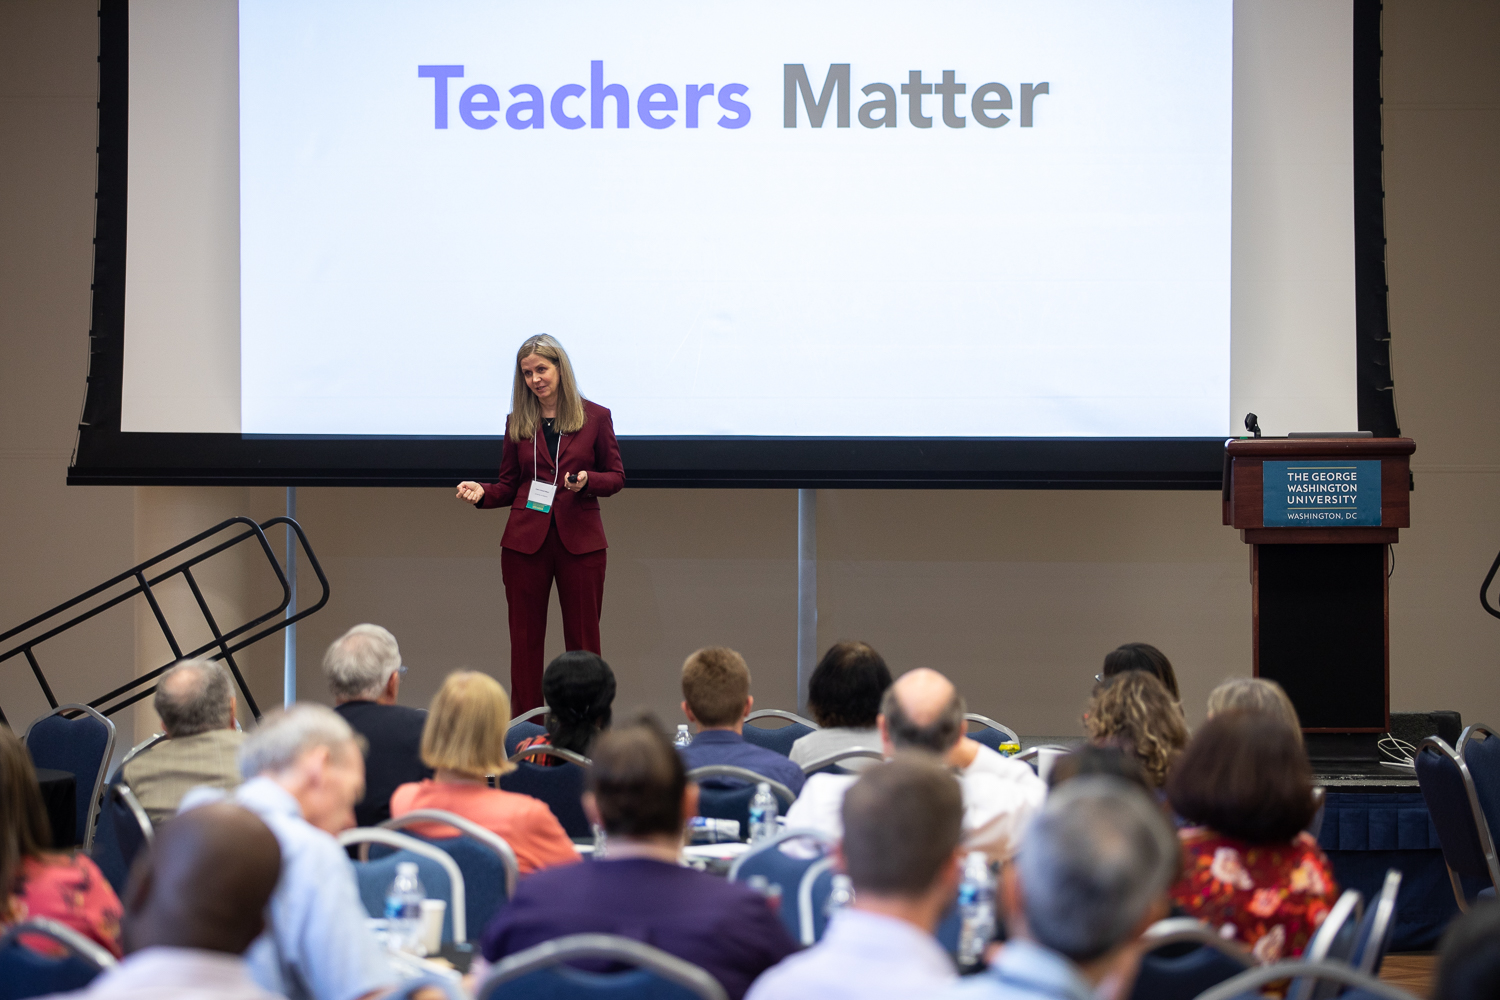 Keynote speaker Claire Howell Major discussed how teachers can learn from evaluation. (Harrison Jones/GW Today)